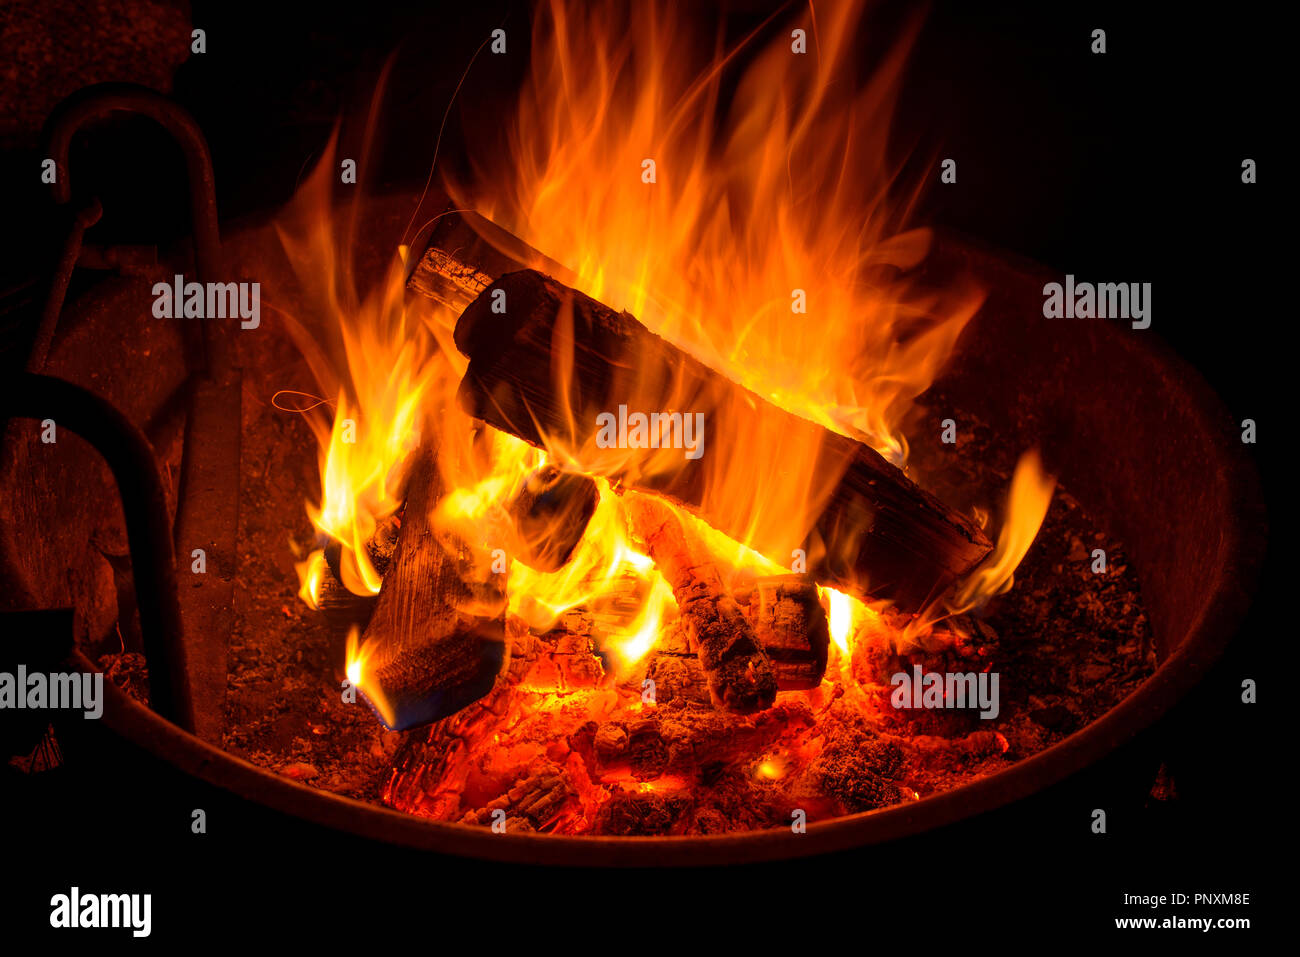 Campfire - Close up view of bright wood fire burning in a camp fire pit. Stock Photo